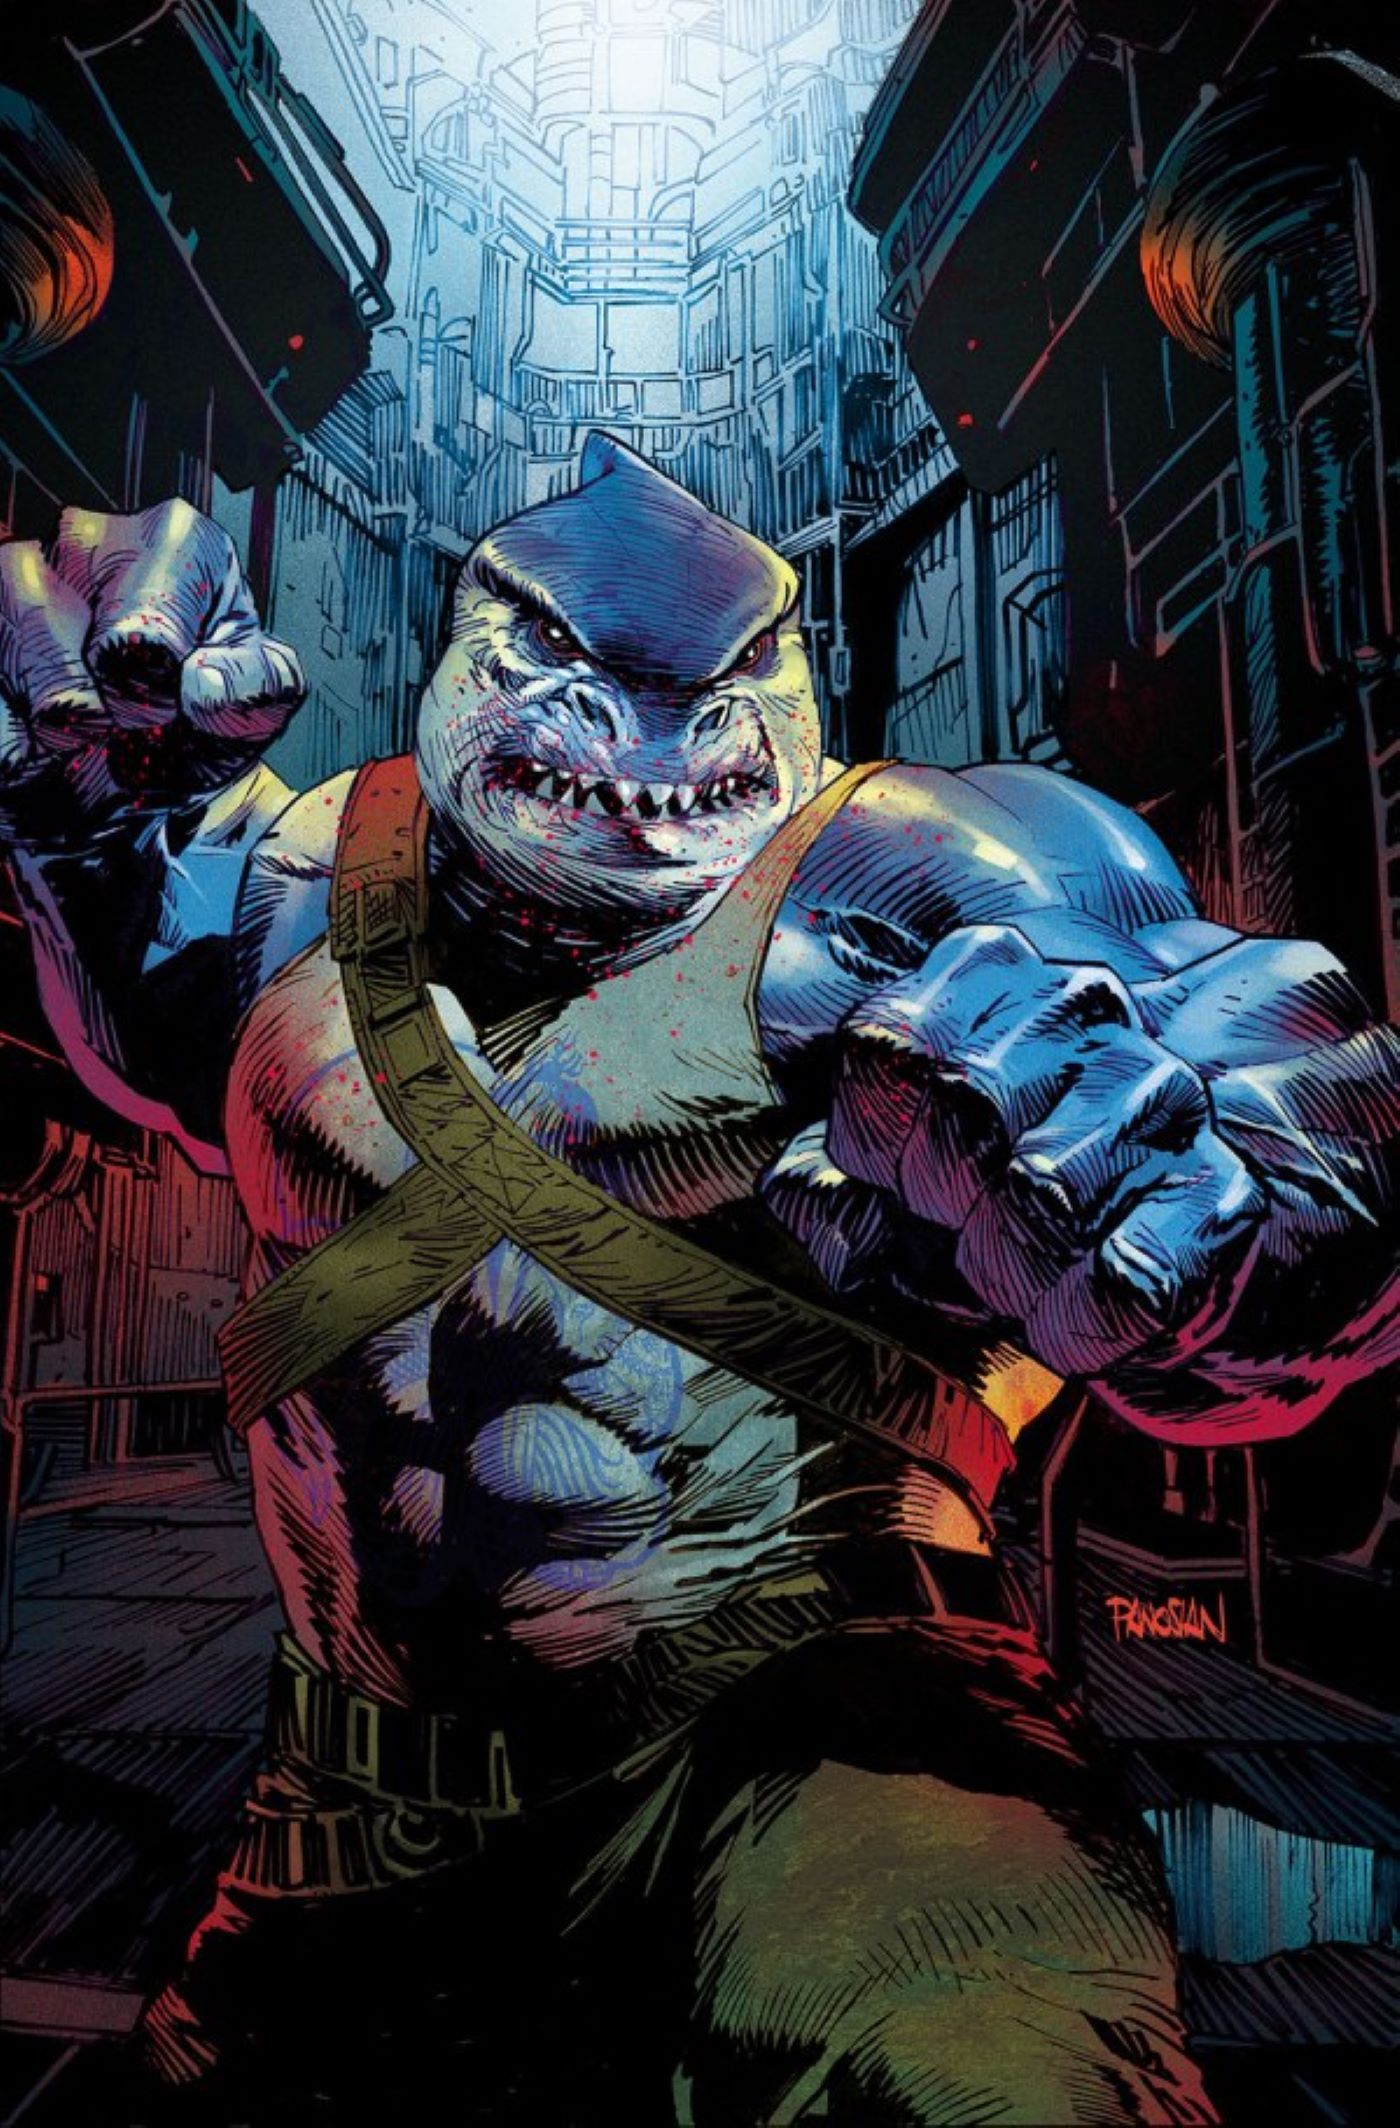 Suicide Squad Kill Arkham Asylum #5 featuring King Shark on the cover.